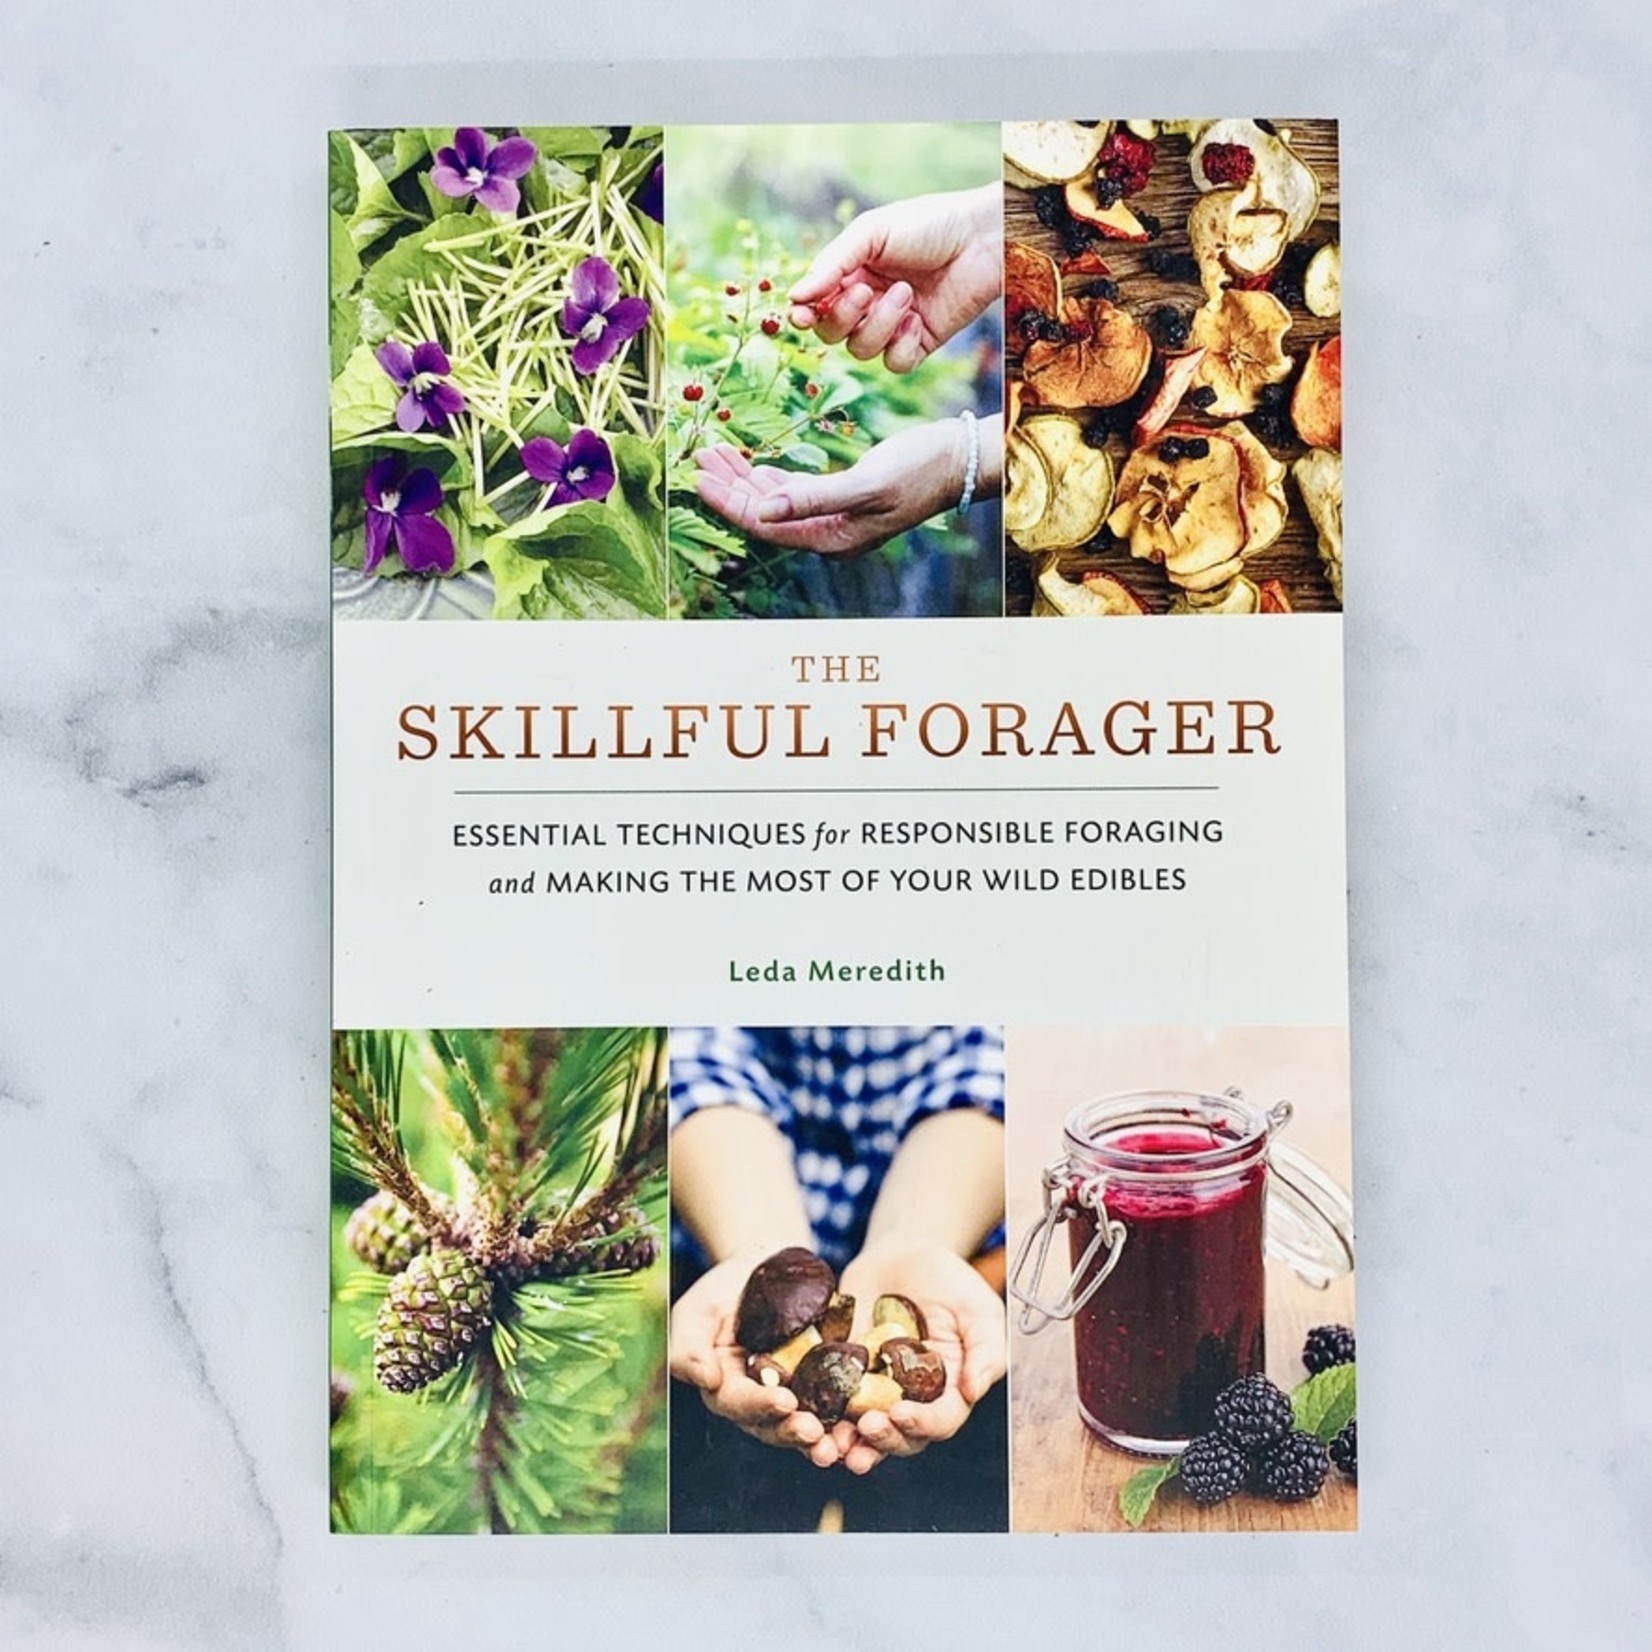 Skillful Forager